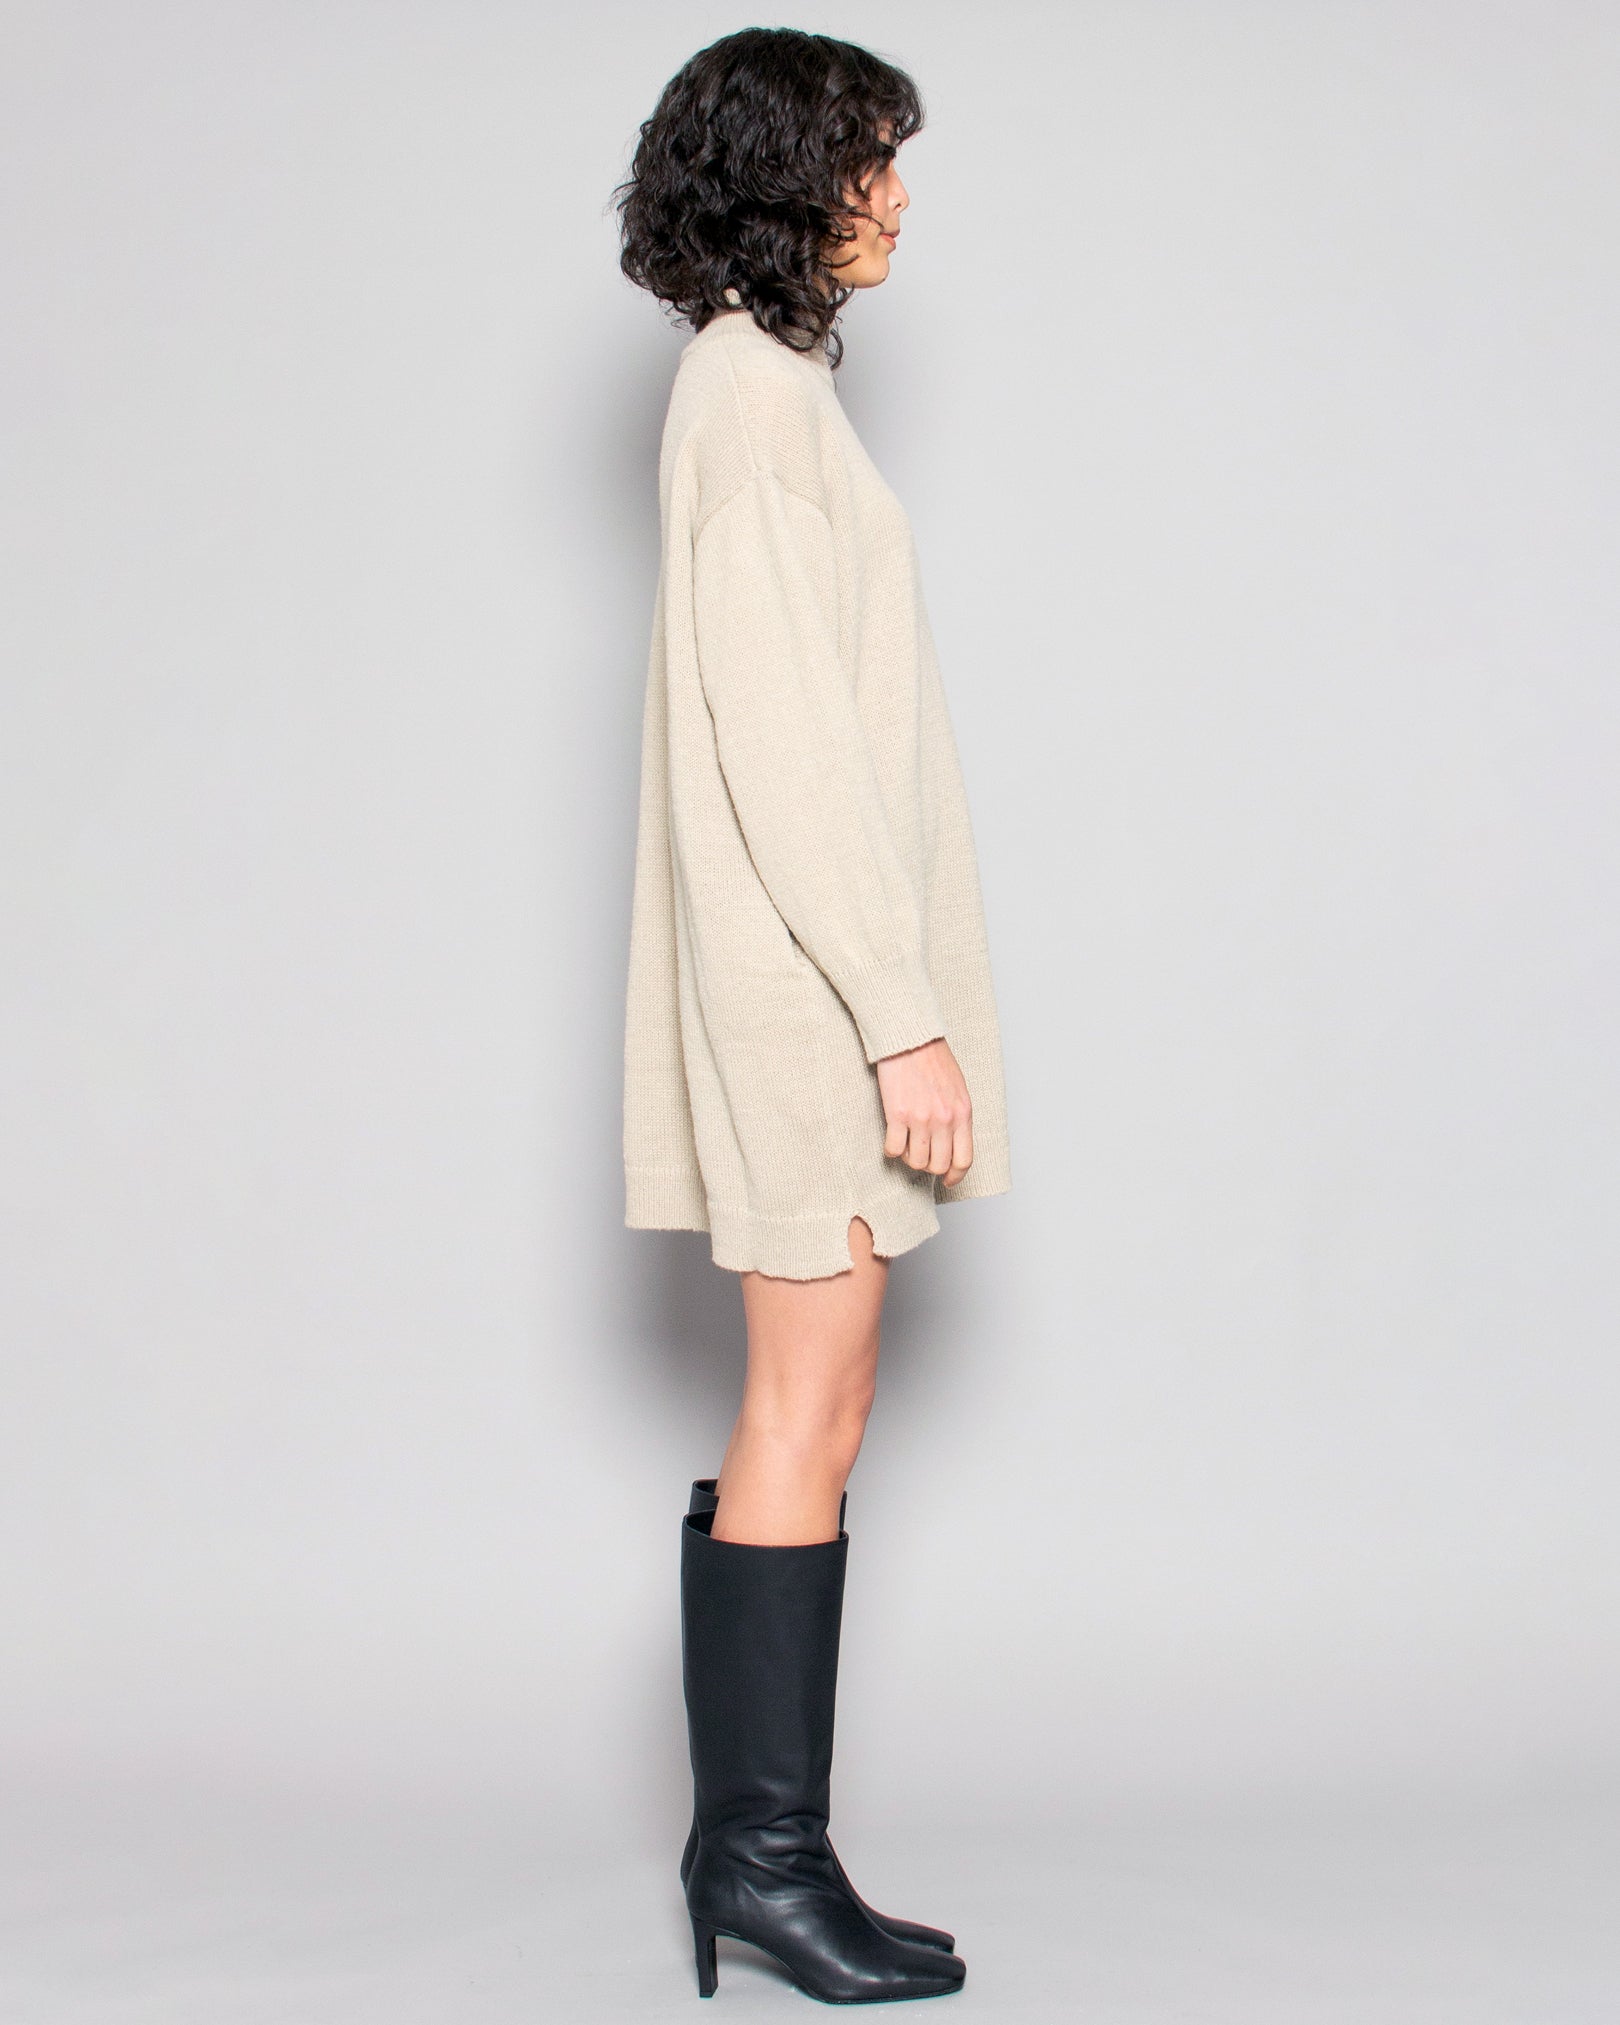 PERSONS Nia Mock Oversized Sweater Dress in Ecru available at Lahn.shop